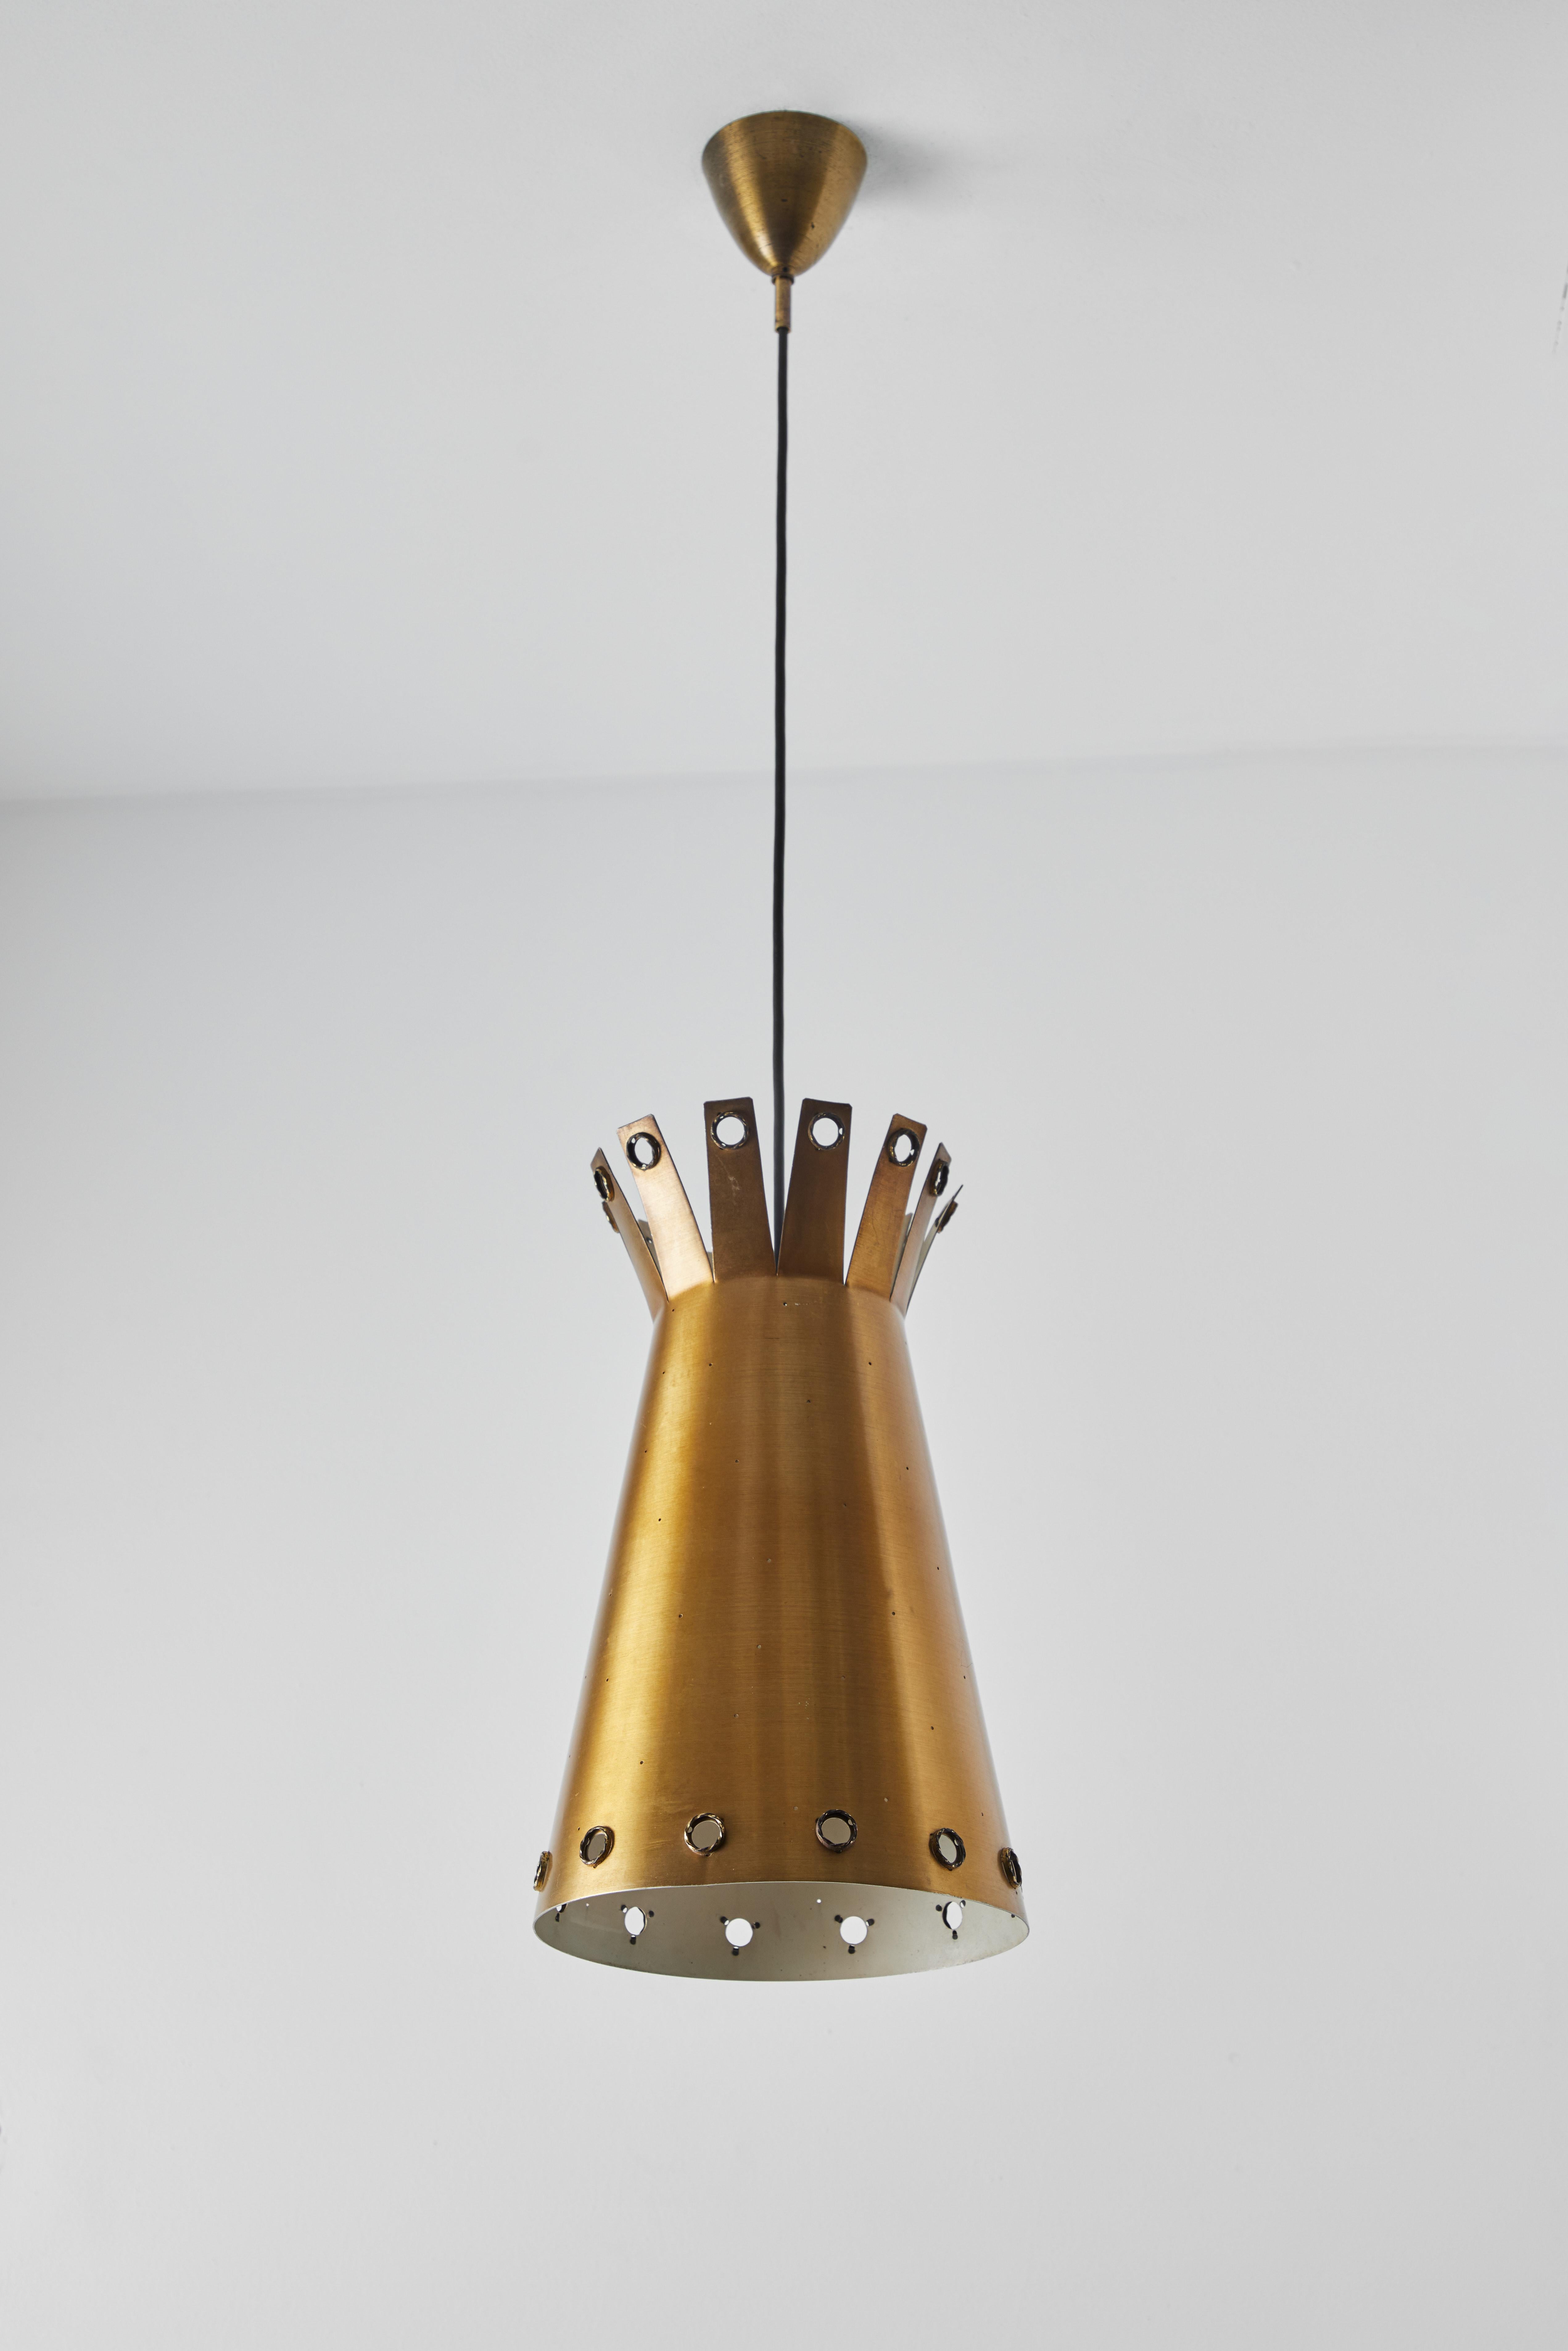 Large 1950s Italian Perforated Brass Double-Cone Pendant In Good Condition For Sale In Glendale, CA